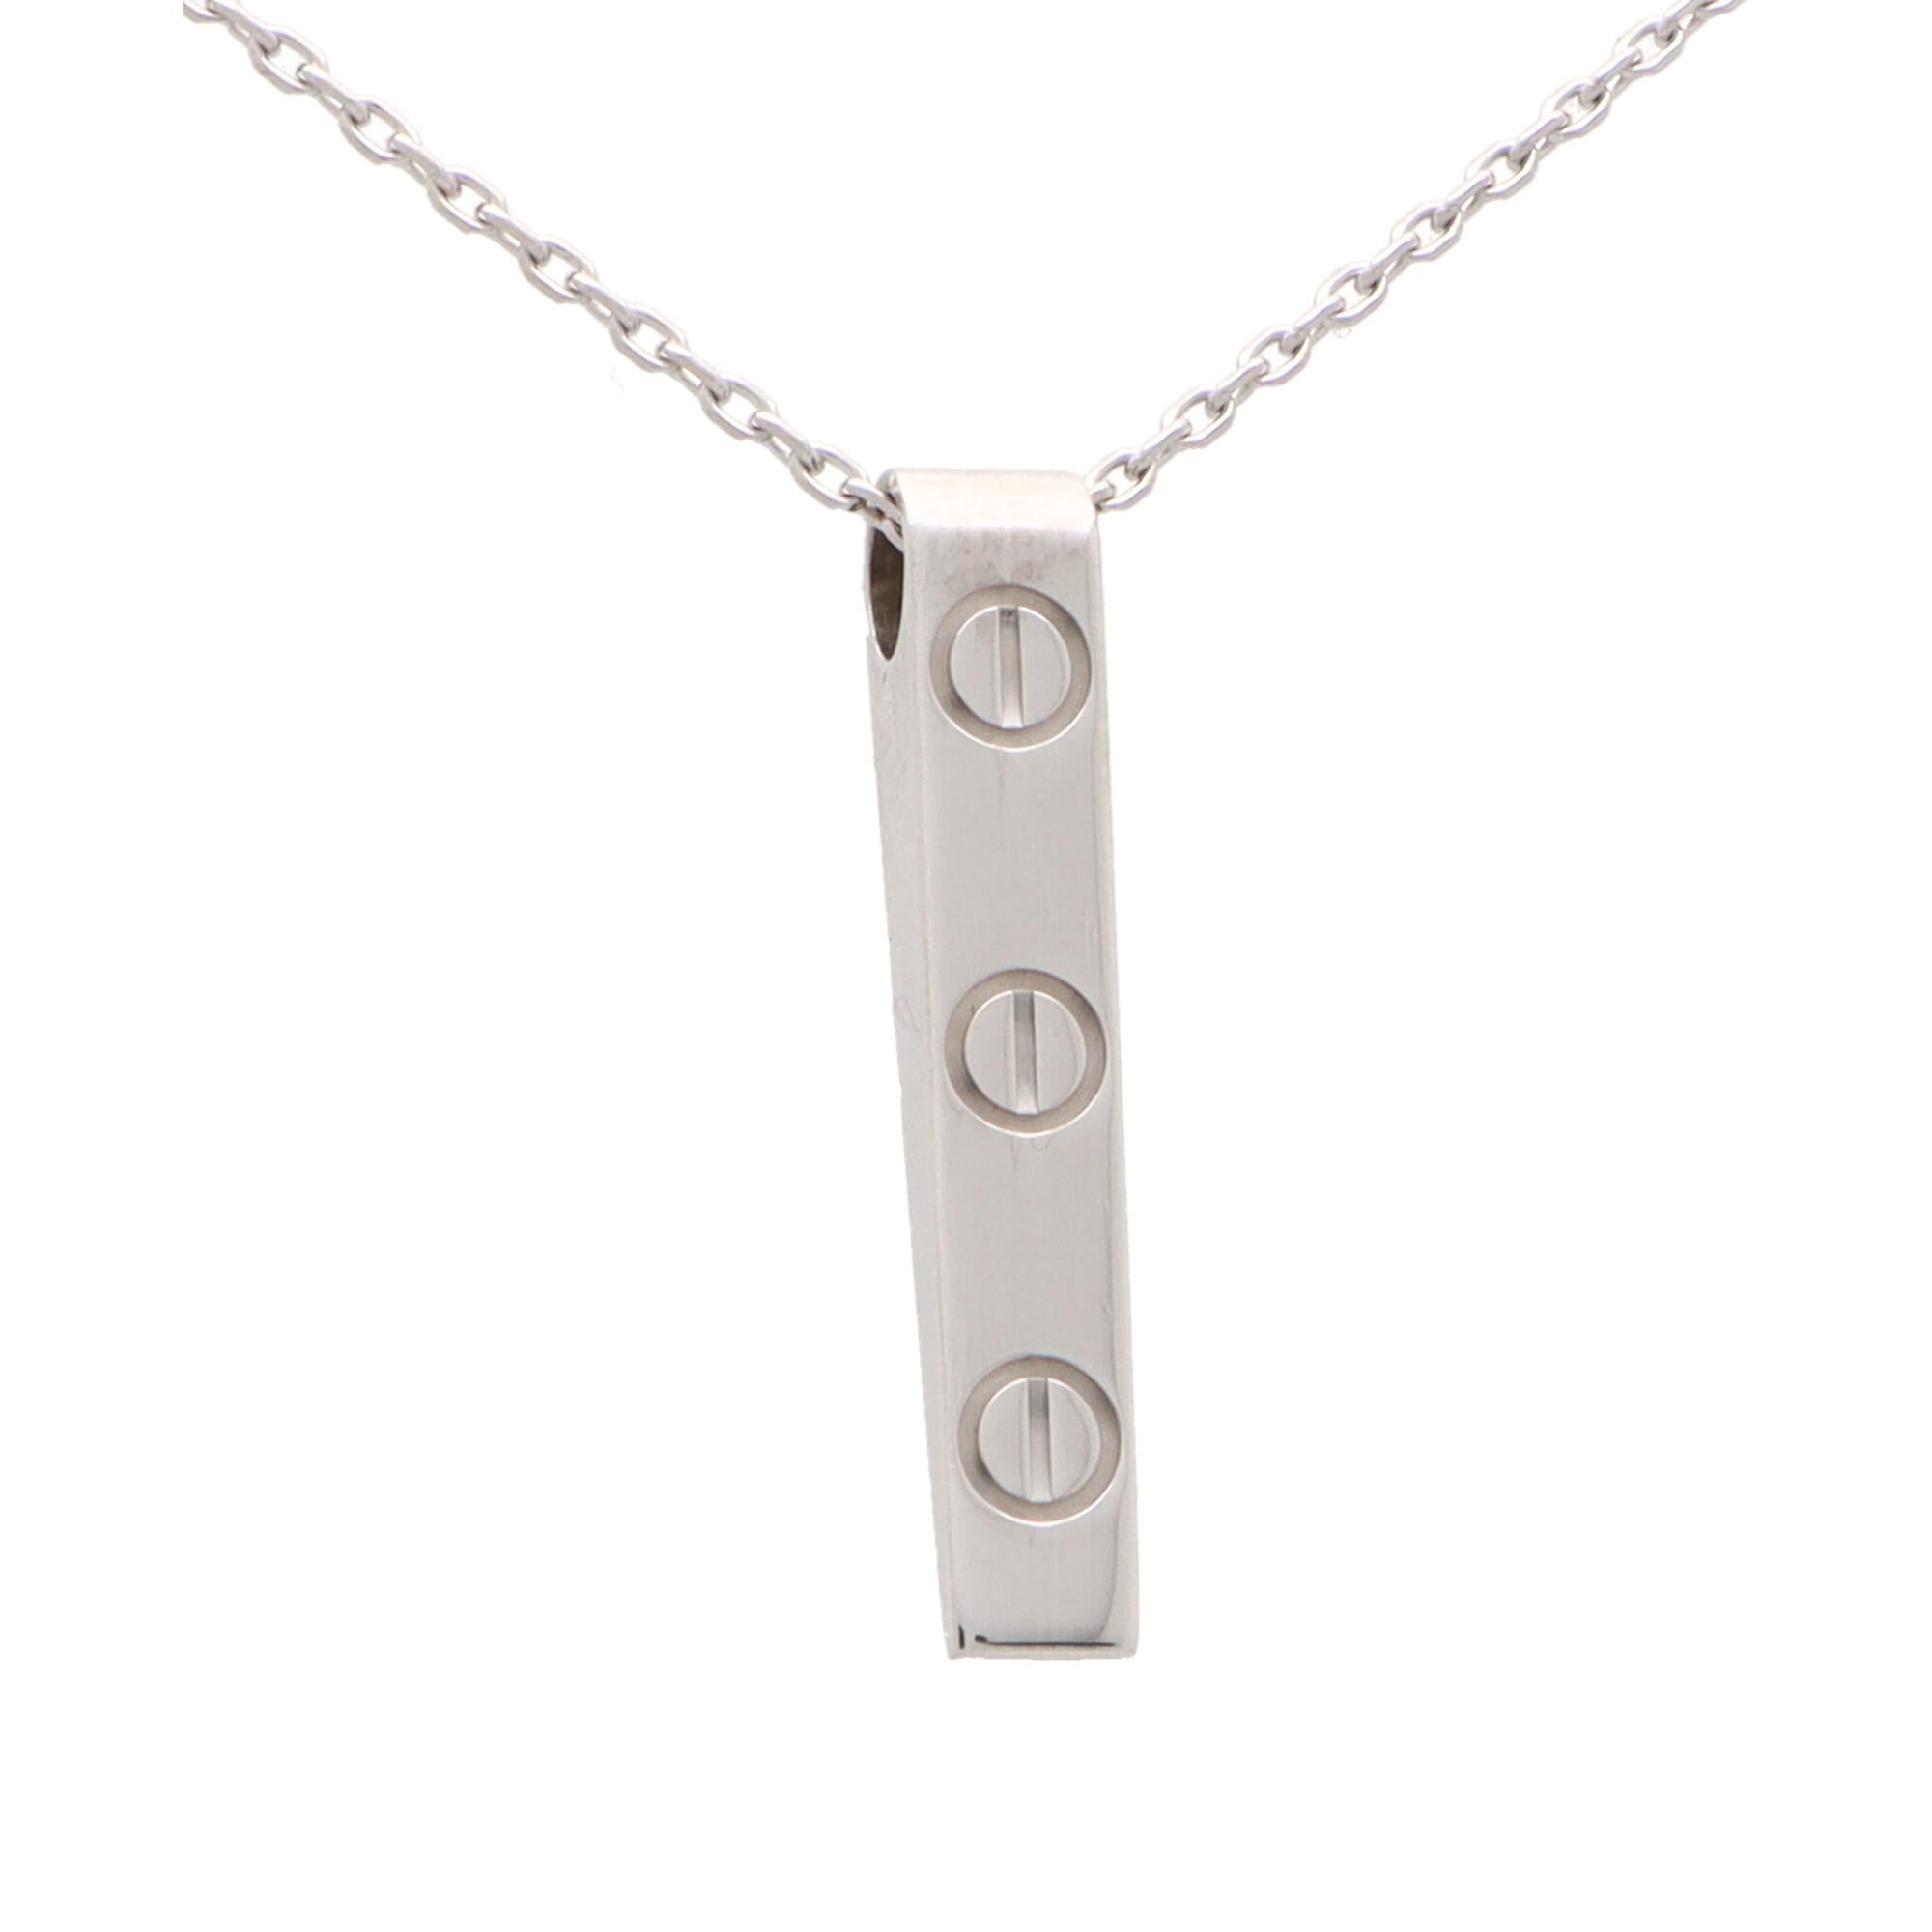 A unique vintage Cartier LOVE bar pendant set in 18k white gold. 

The pendant is formed in the iconic Cartier love motif, a collection that is a firm favourite of many. The bar is set with 3 nail motifs and hangs from a 16-18-inch white gold trace